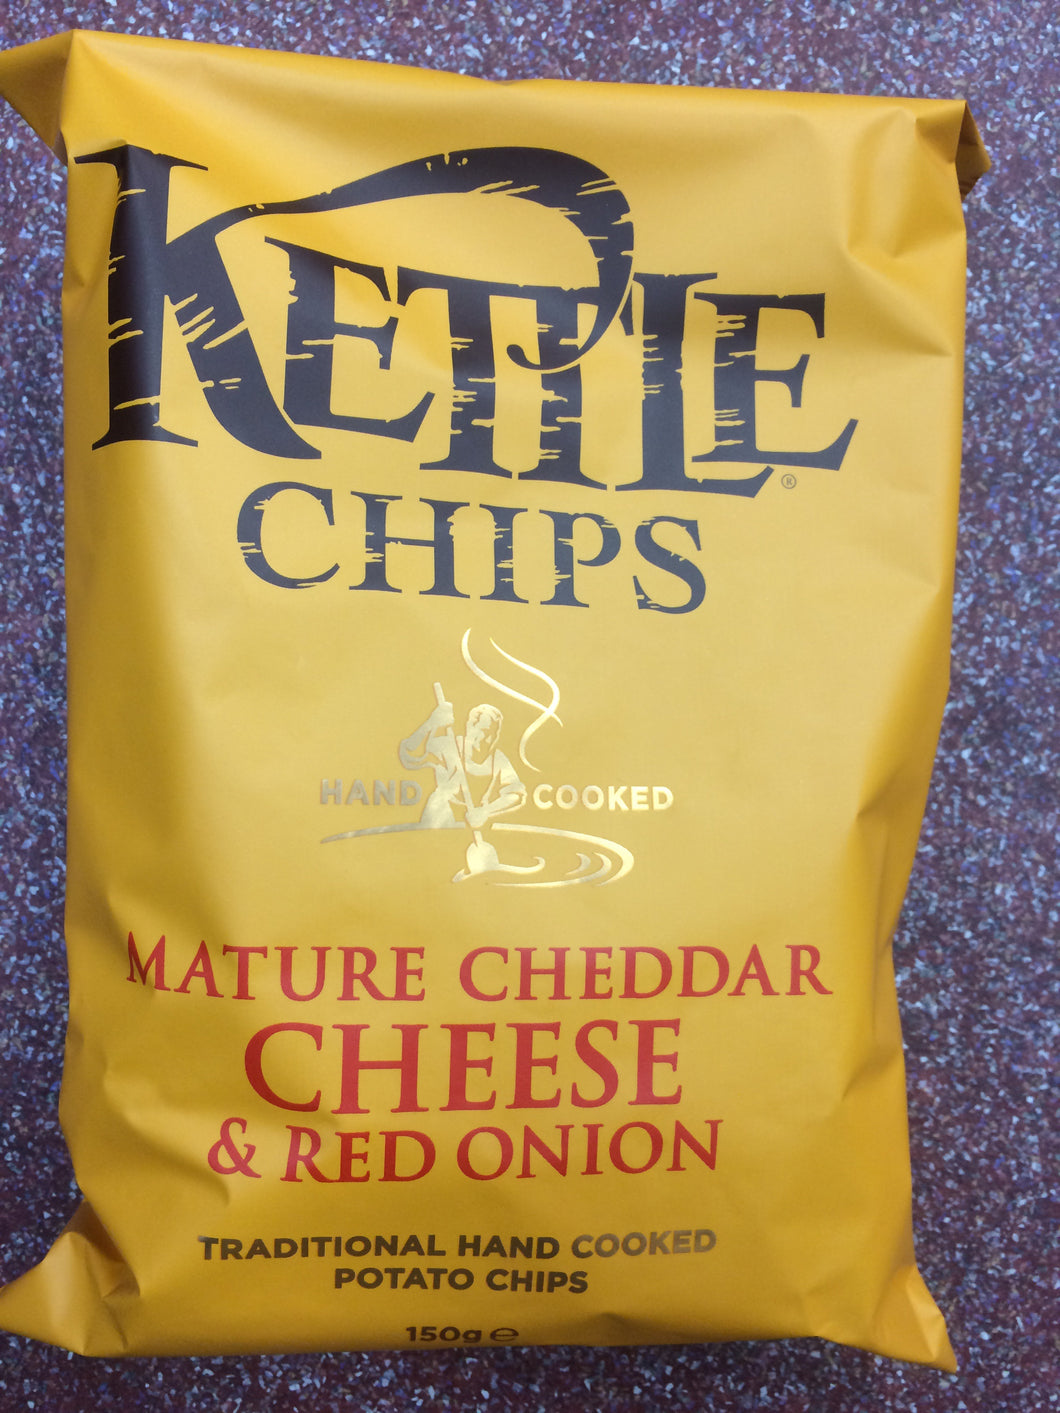 Kettle Chips Mature Cheddar & Red Onion 150g Bag